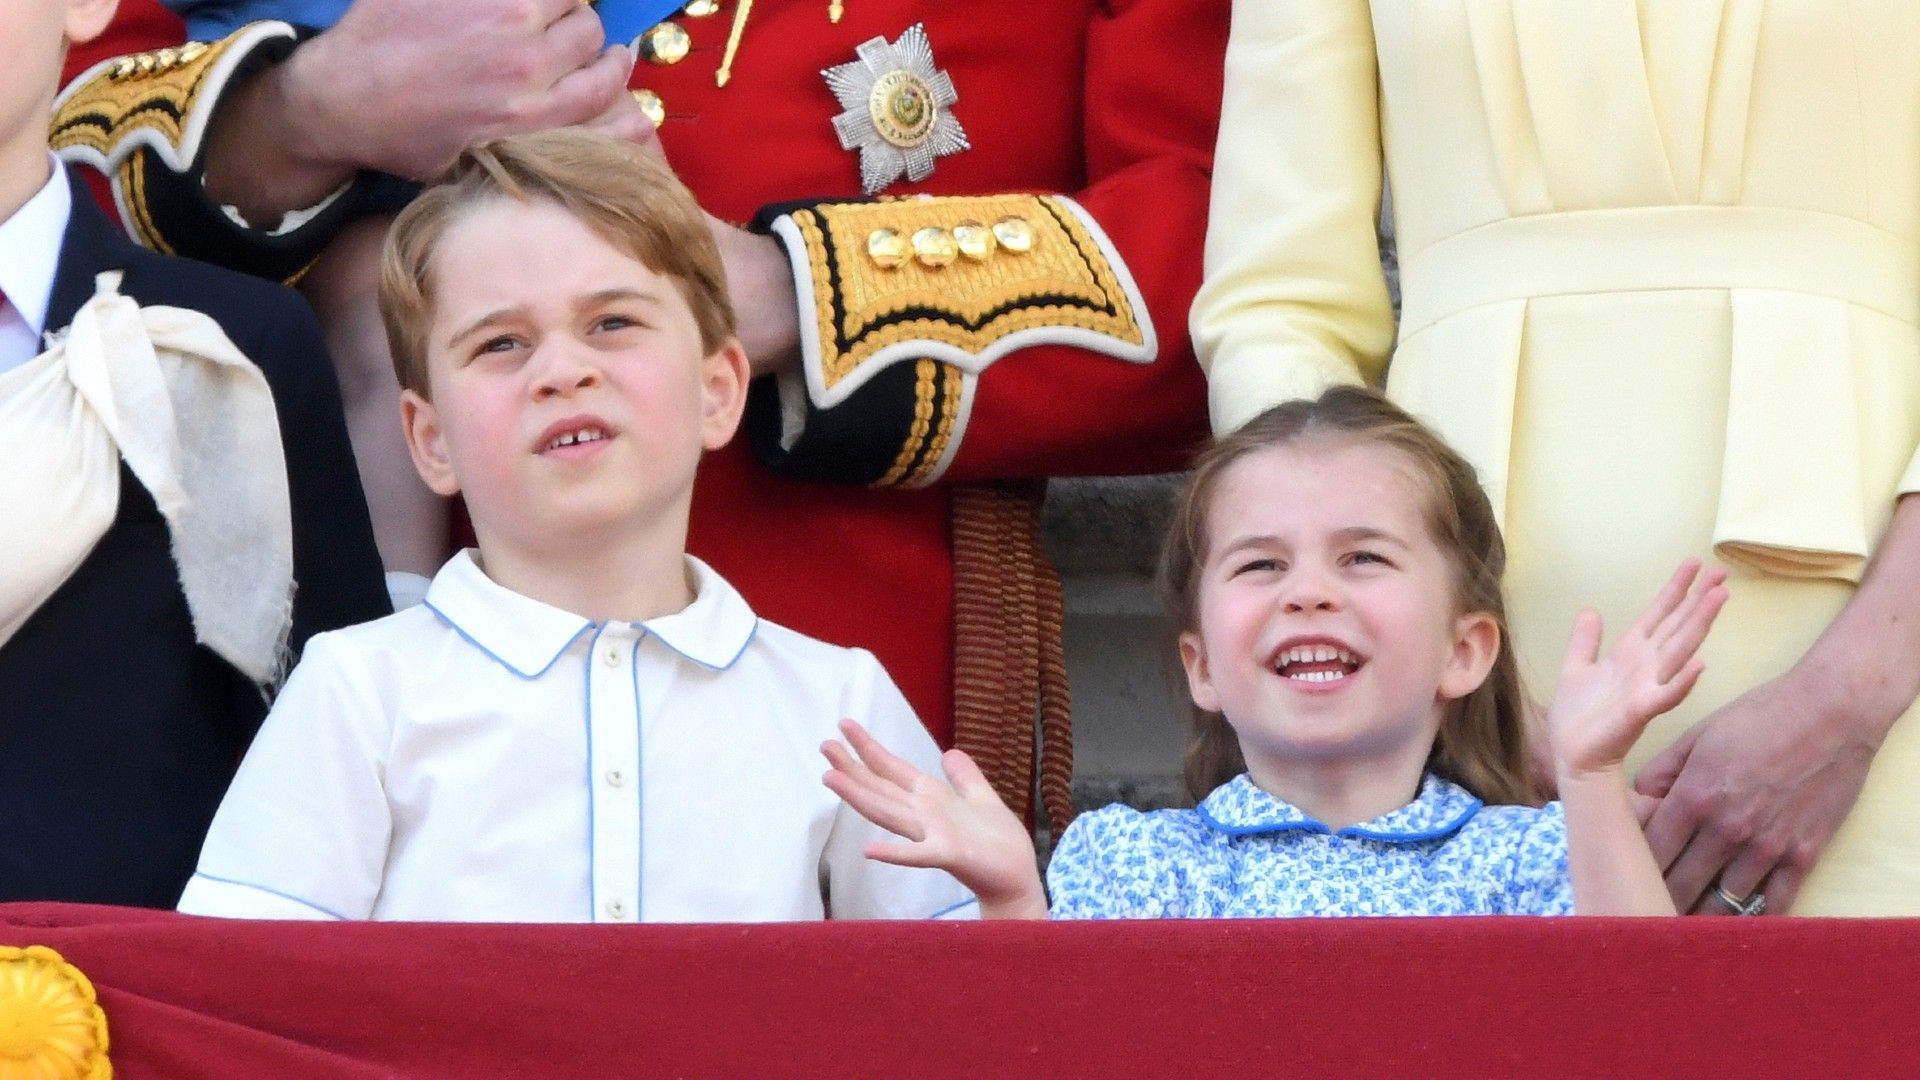 <p>                     Many royals maintain a tradition of sharing a brand new portrait of themselves on their respective birthdays, as a way of keeping the public up to date on their lives, and to thank royal fans for their well wishes.                    </p>                                      <p>                     It has, for example, become a tradition for the Prince and Princess of Wales to share a picture of their children, Prince George, Princess Charlotte, and Prince Louis on their birthdays. Often, Kate and William also share new images of themselves on their special days every year, too. It certainly provides a lovely insight into the lives of the royals as they get older.                   </p>